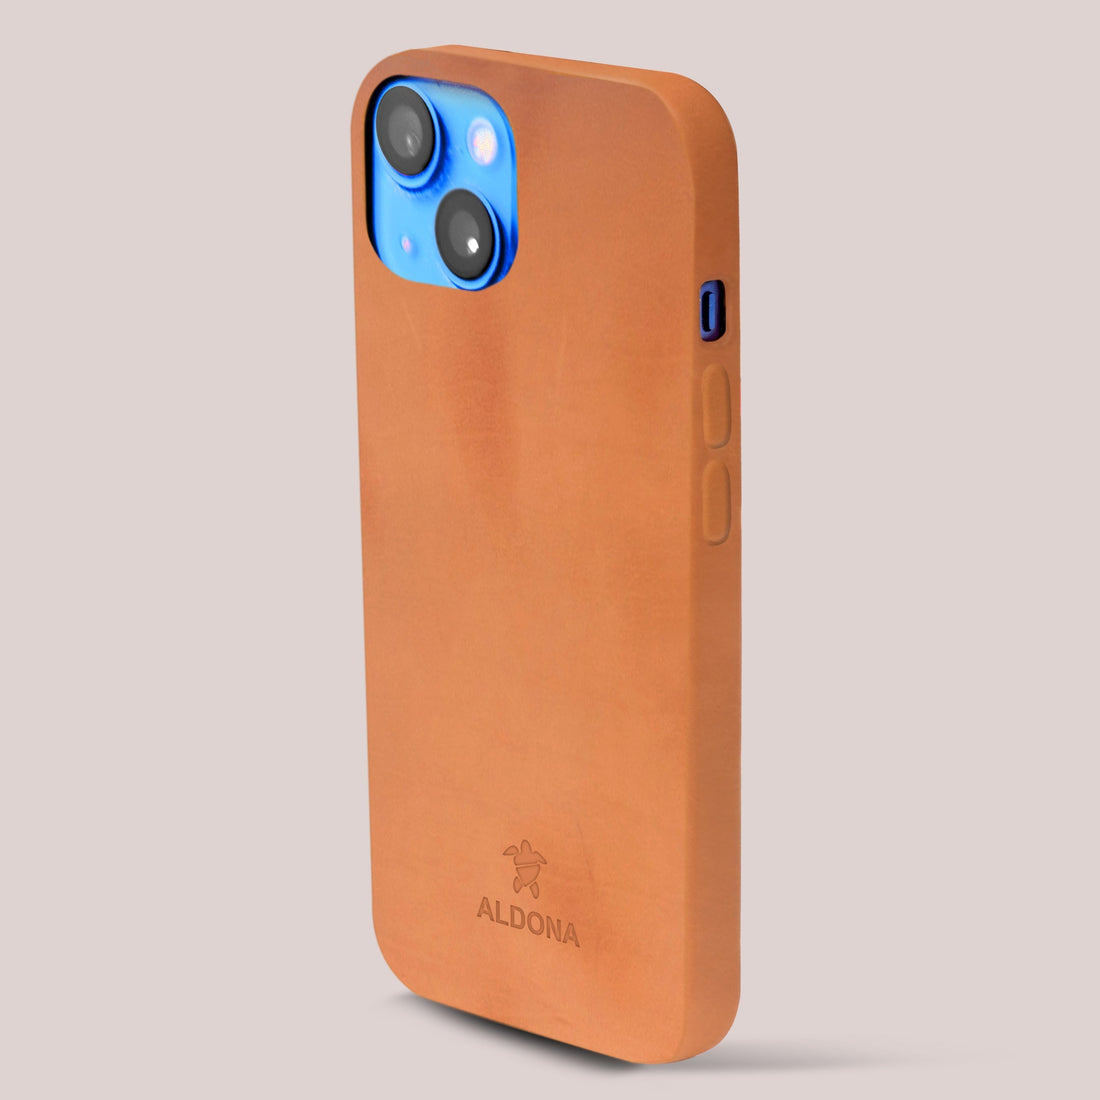 Kalon Case for iPhone 12 Pro with MagSafe Compatibility - Burnt Tobacco